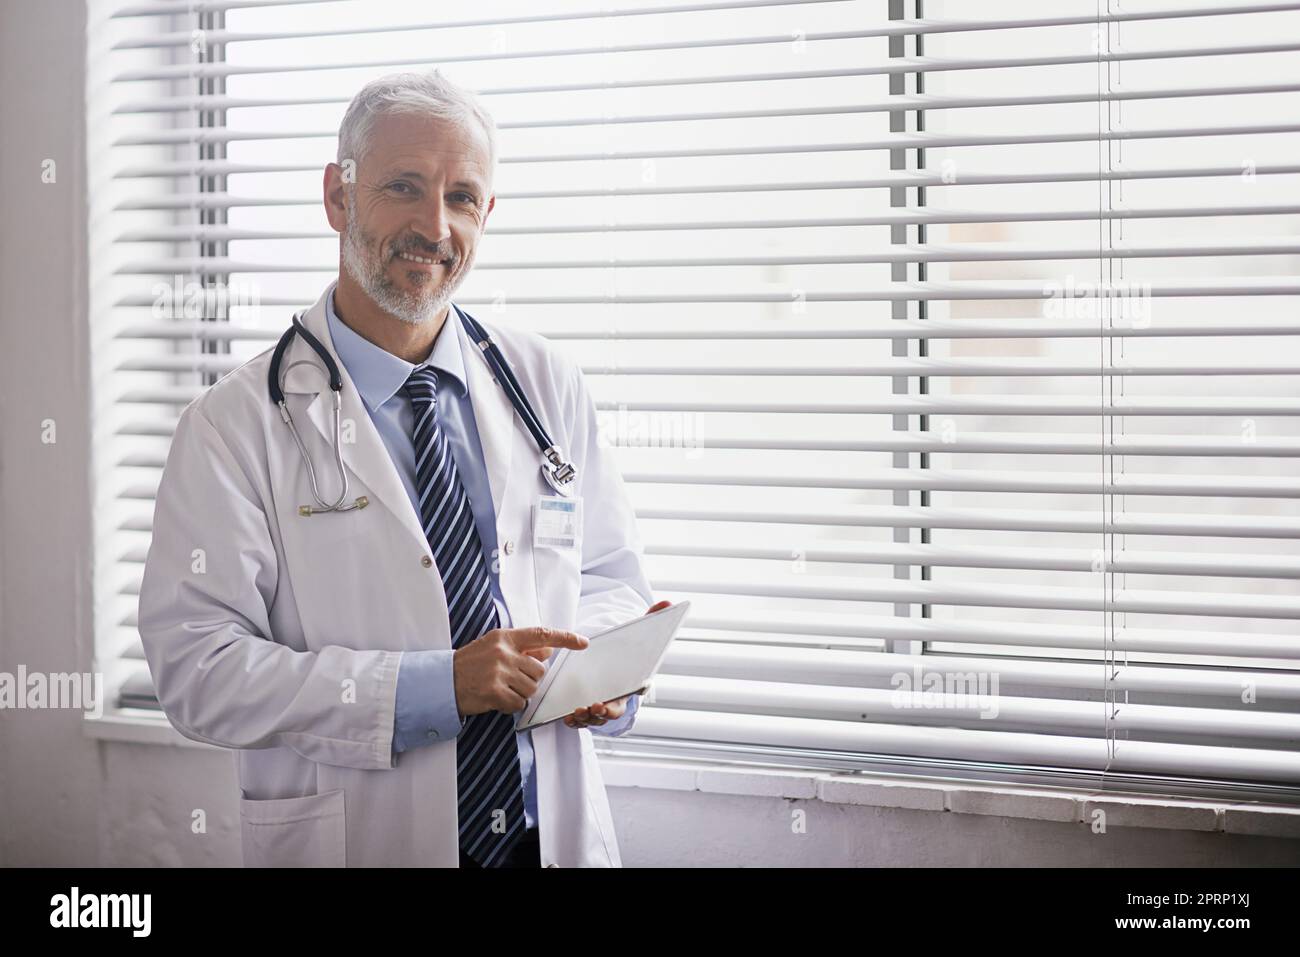 Making good use of technology in his practice. Portrait of a mature male doctor using a digital tablet. Stock Photo